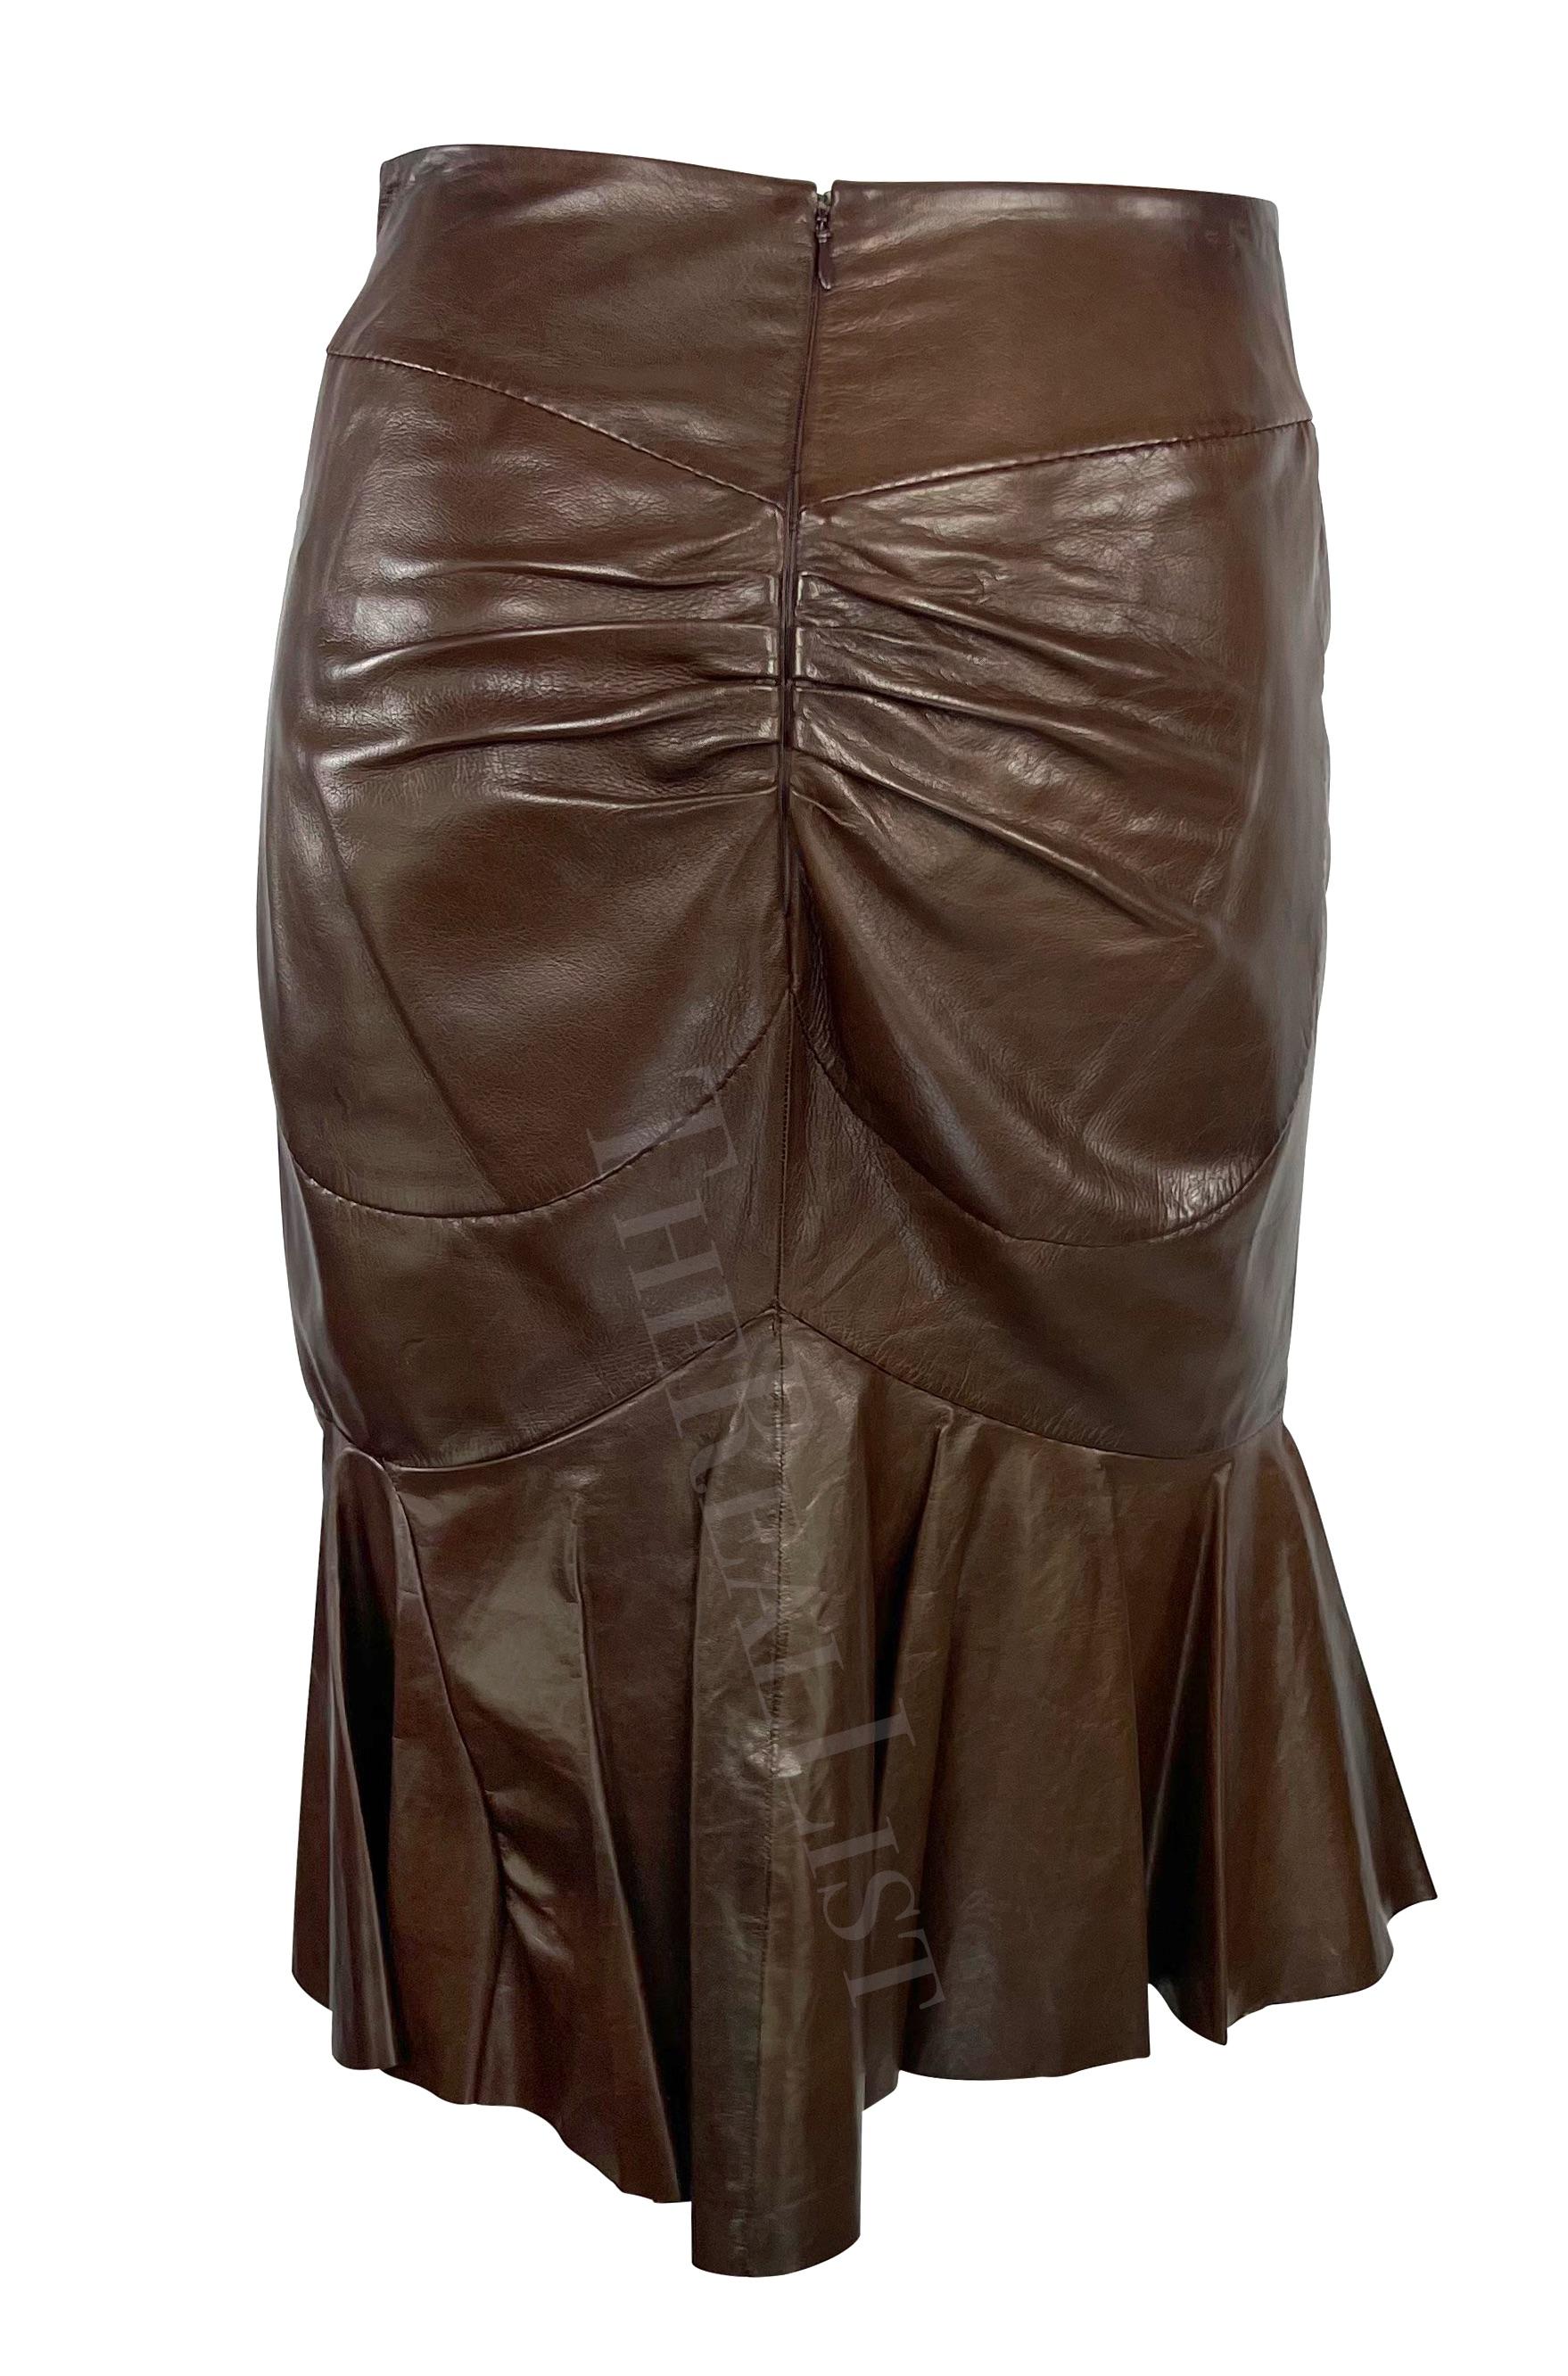 S/S 2003 Yves Saint Laurent by Tom Ford Anatomic Brown Leather Ruffle Skirt For Sale 2